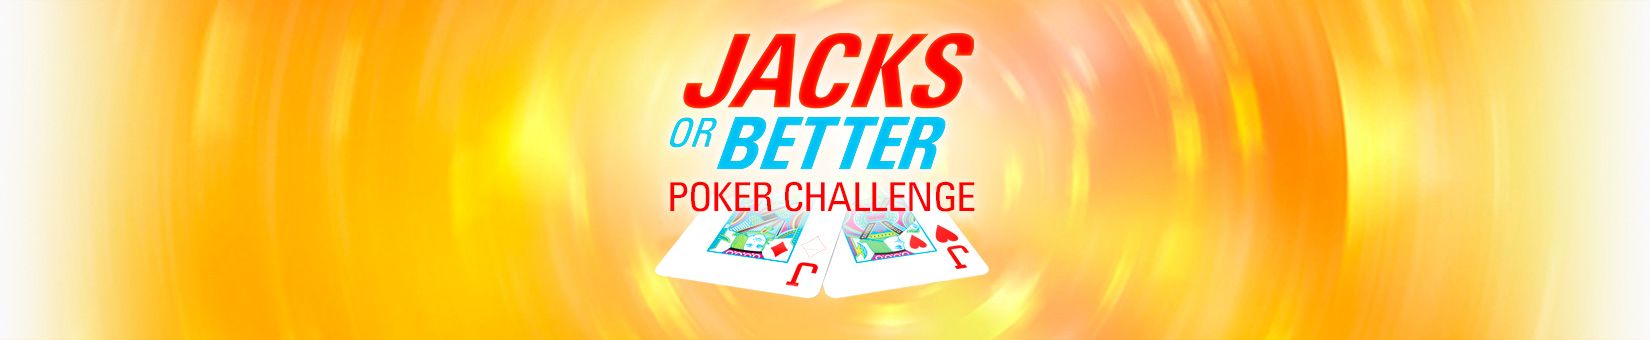 Poker Rules Jacks Or Better Trips To Win